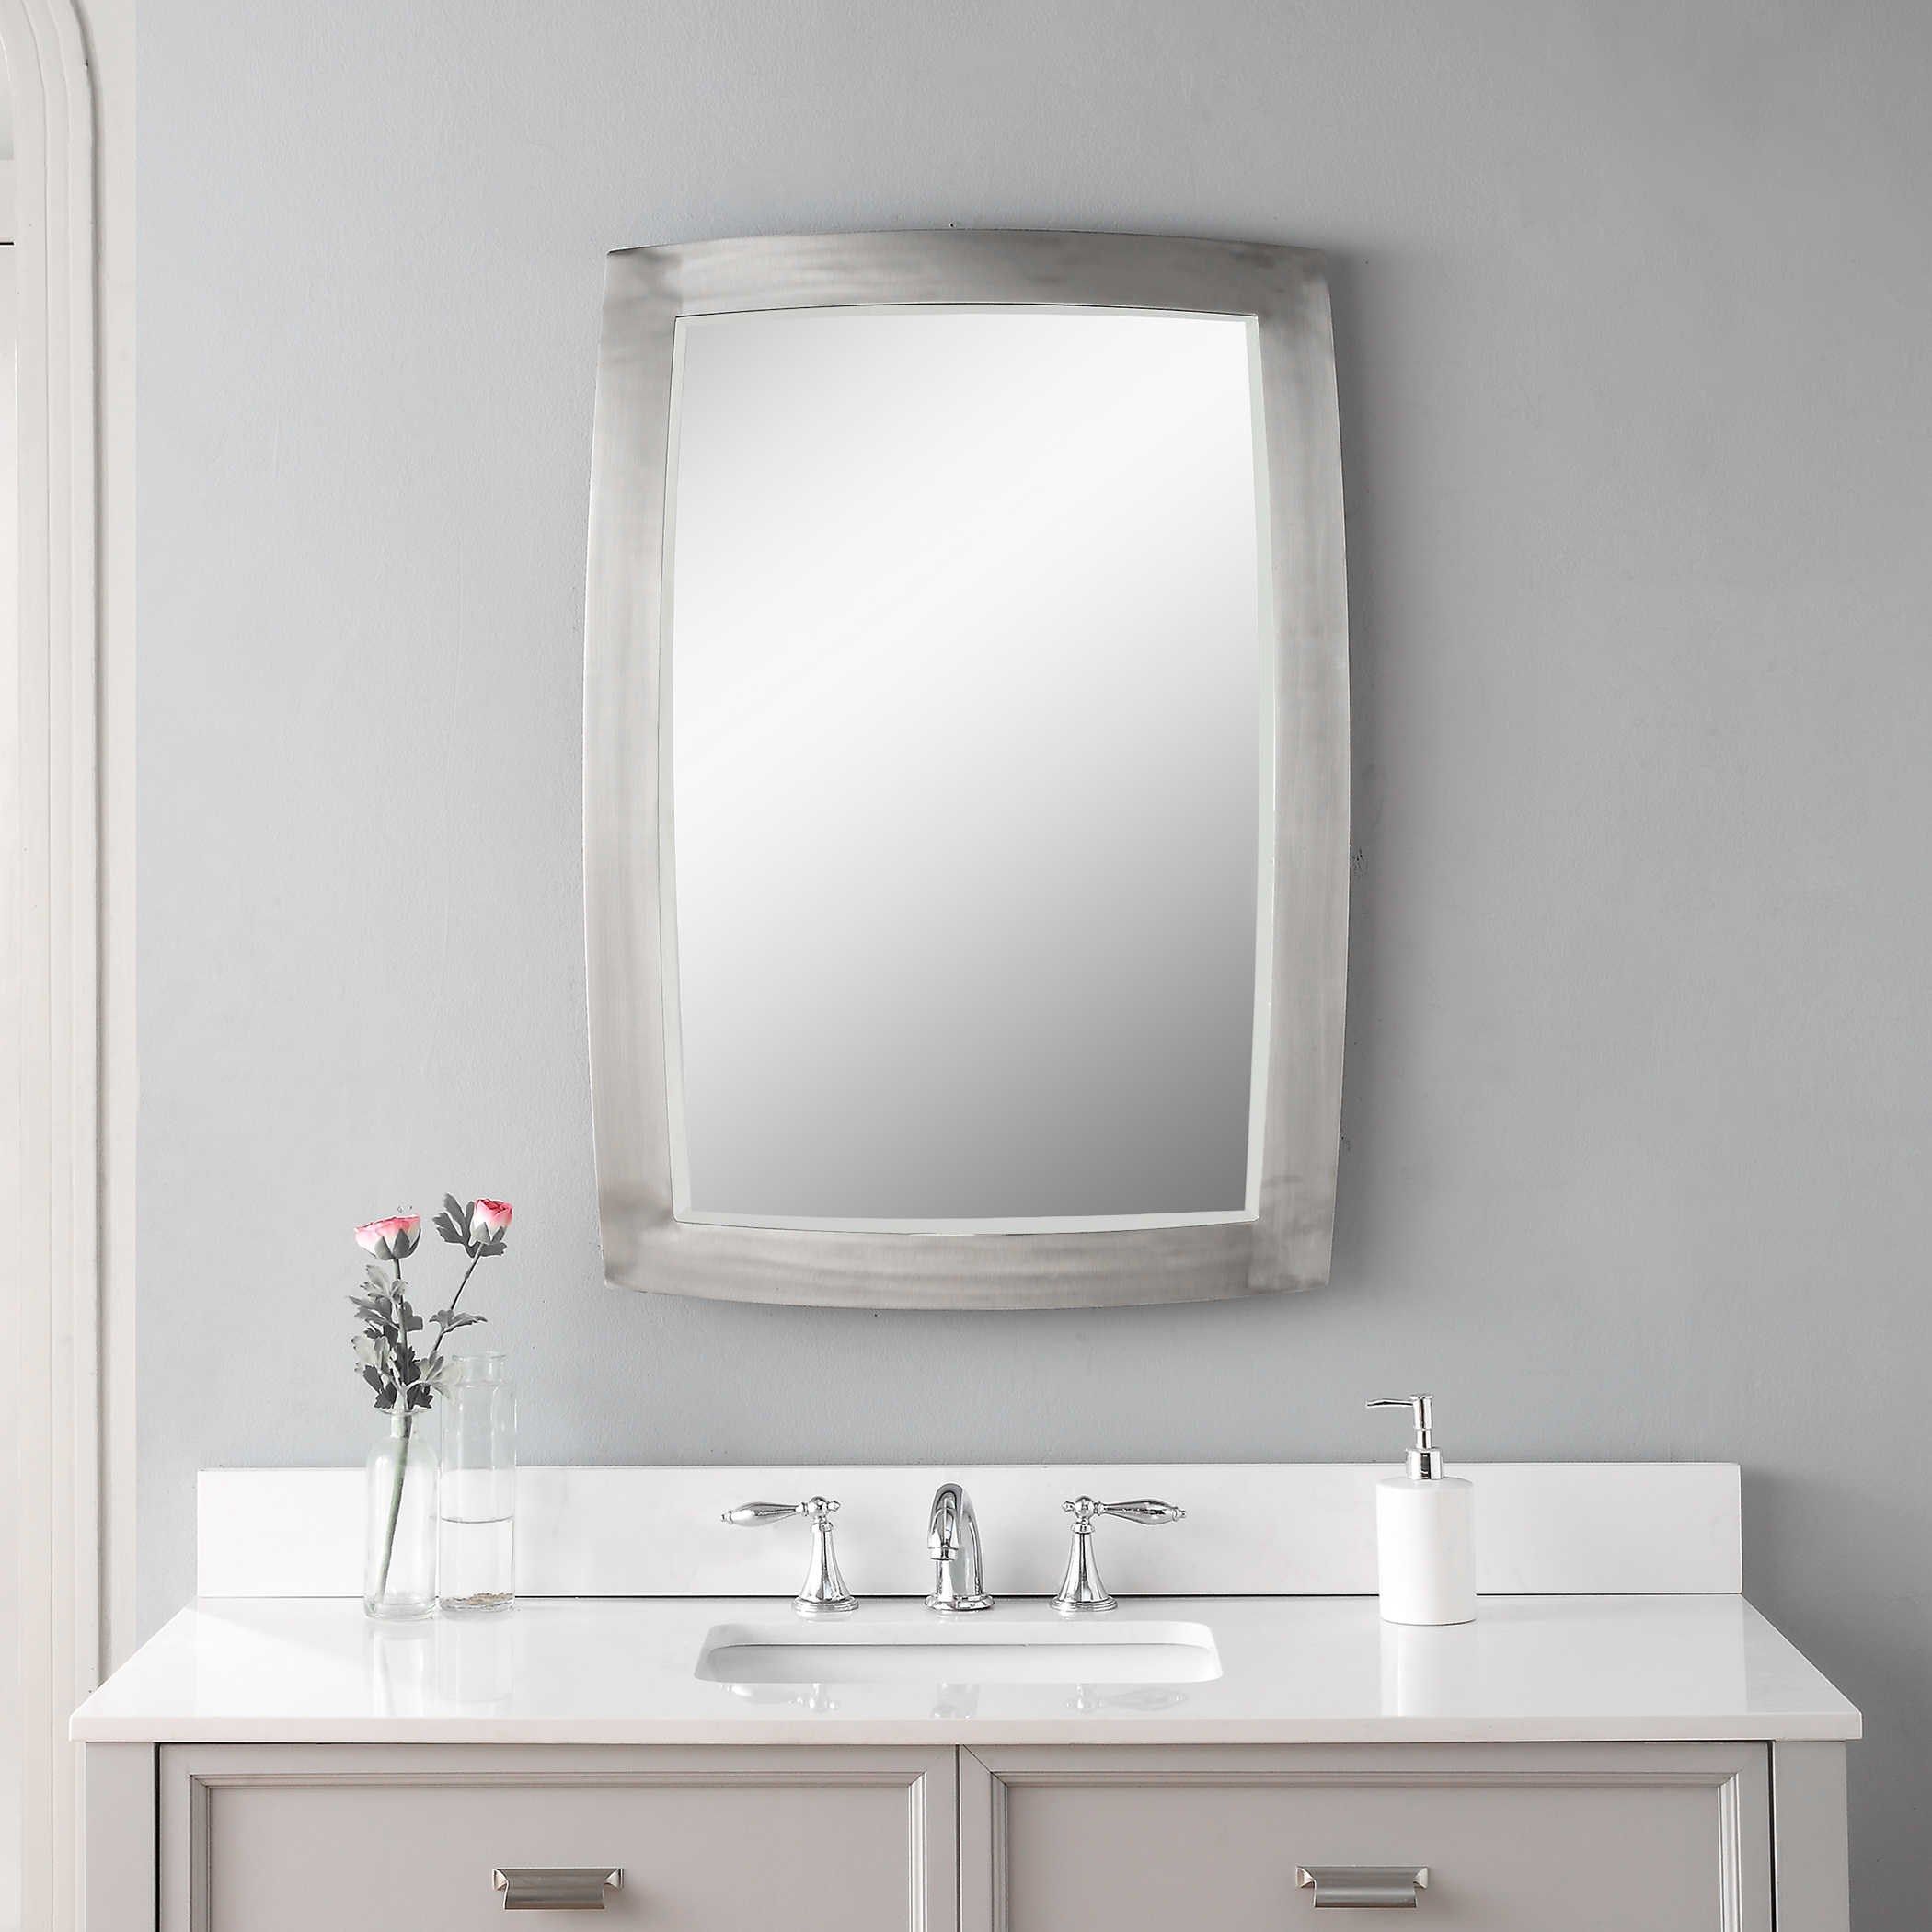 Uttermost Mirrors Haskill Brushed Nickel Mirror | Sheely's Furniture In Drake Brushed Steel Wall Mirrors (View 3 of 15)